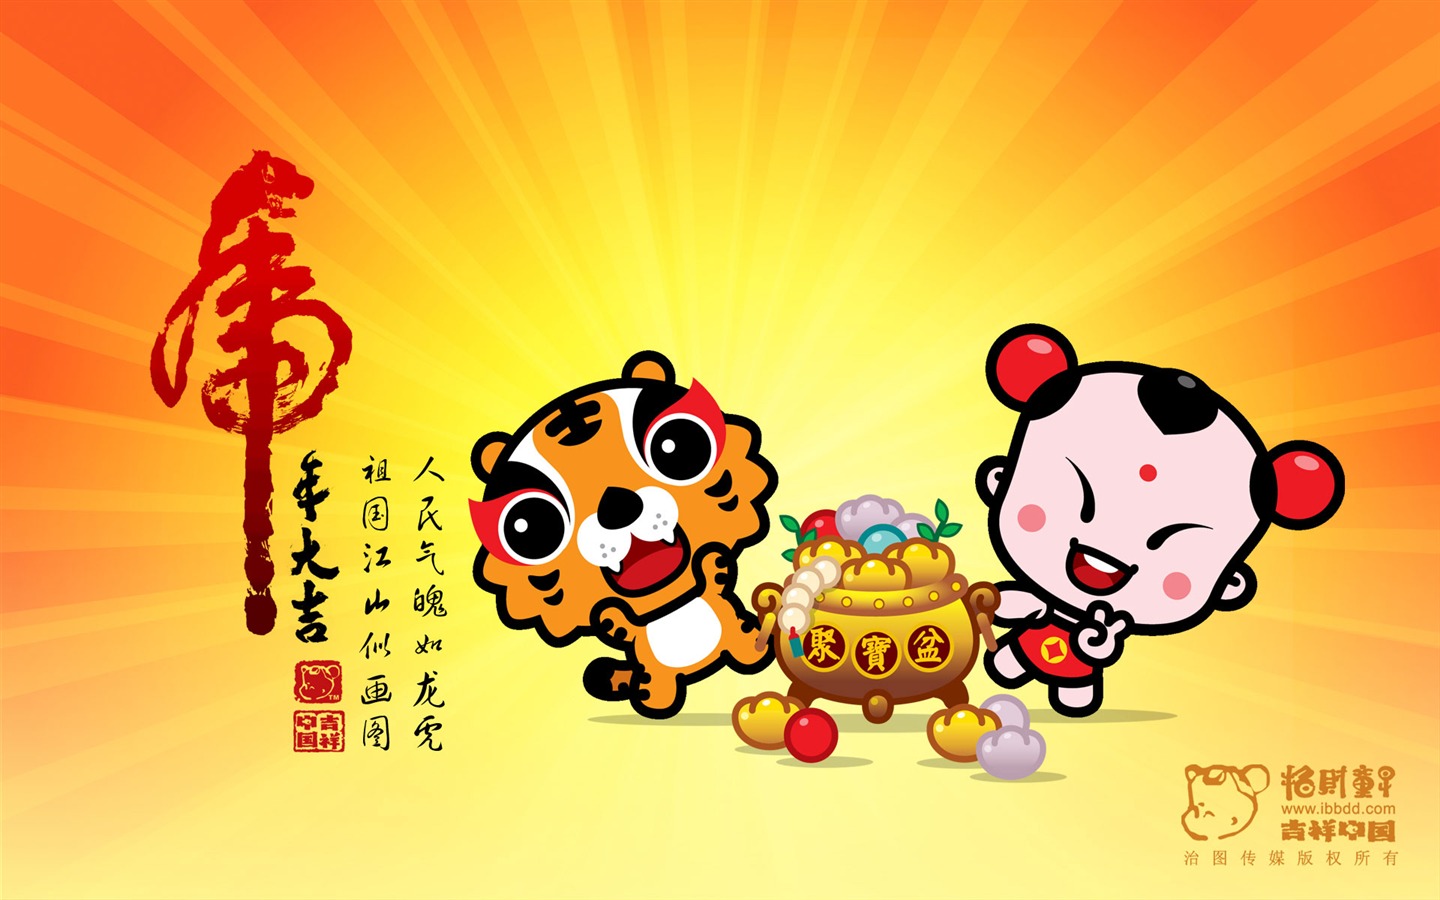 Lucky Boy Year of the Tiger Wallpaper #14 - 1440x900